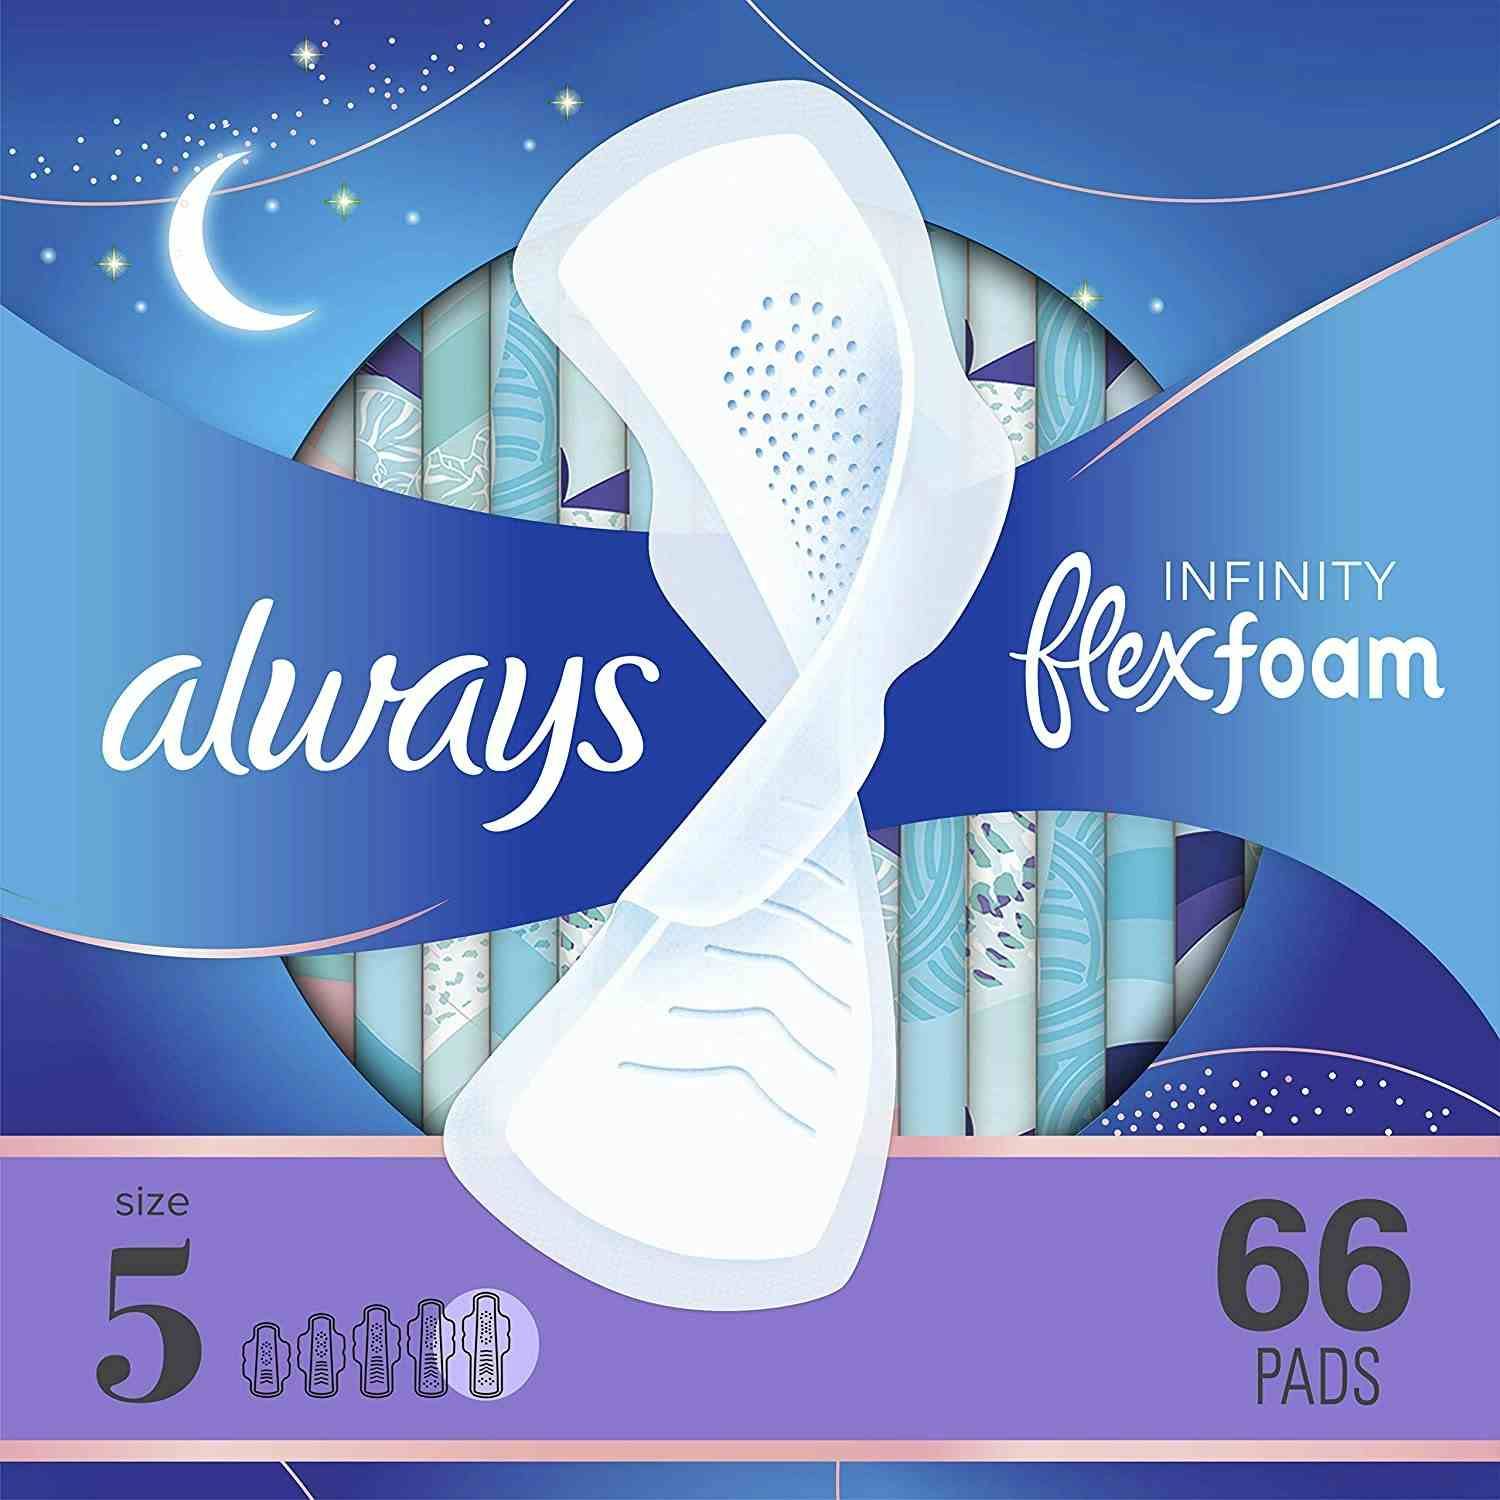 Always Infinity Pads with Wings, Size 5, Unscented, Extra Heavy Overnight Absorbency, 80348110, Pack of 18